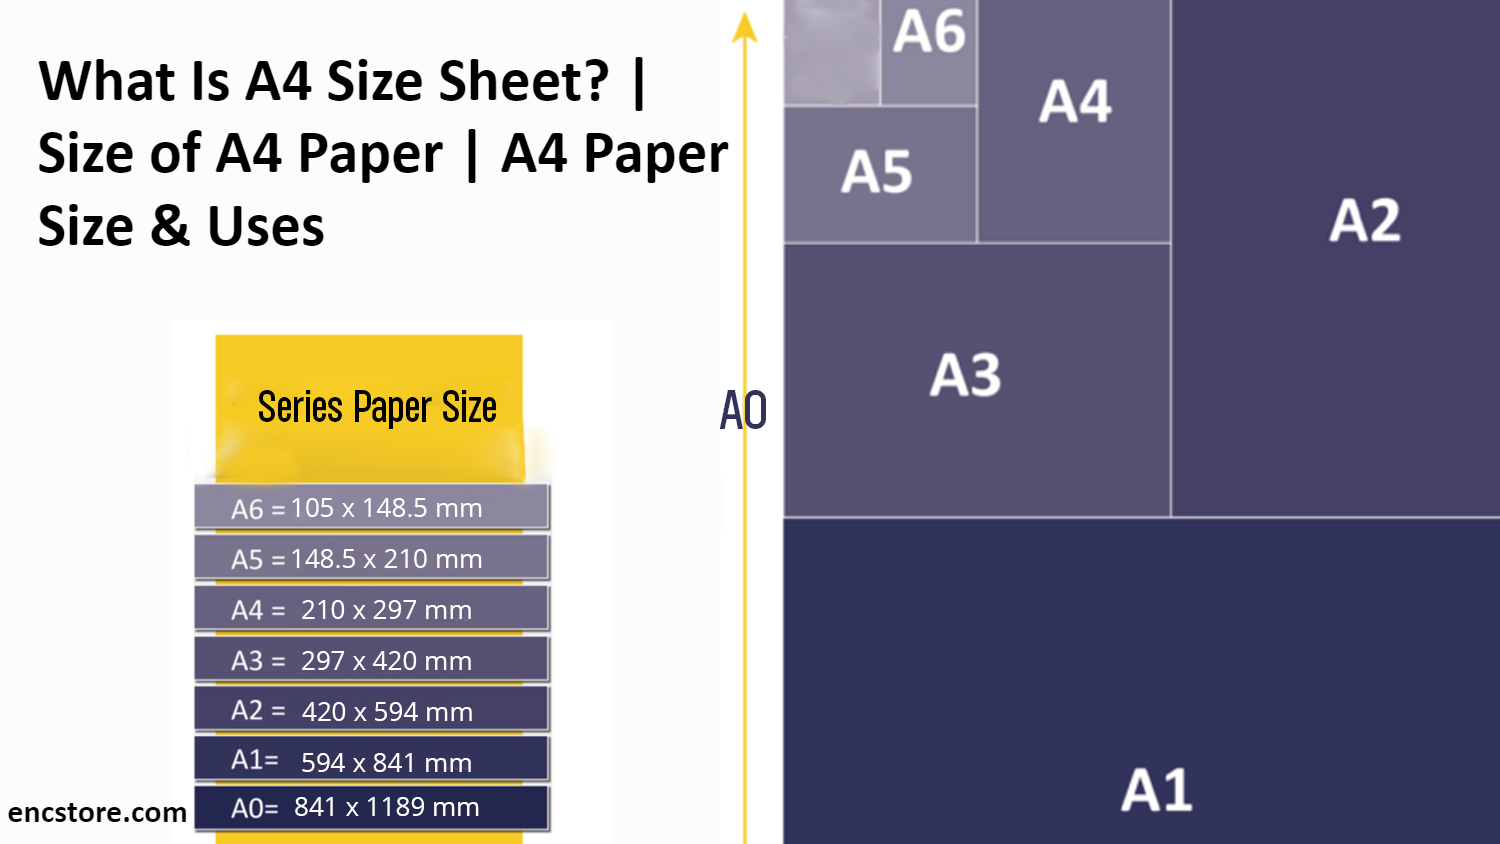 A4 Size Sheet, Size of A4 Paper & Uses, Paper Sizes A0, A1, A2, A3, A4